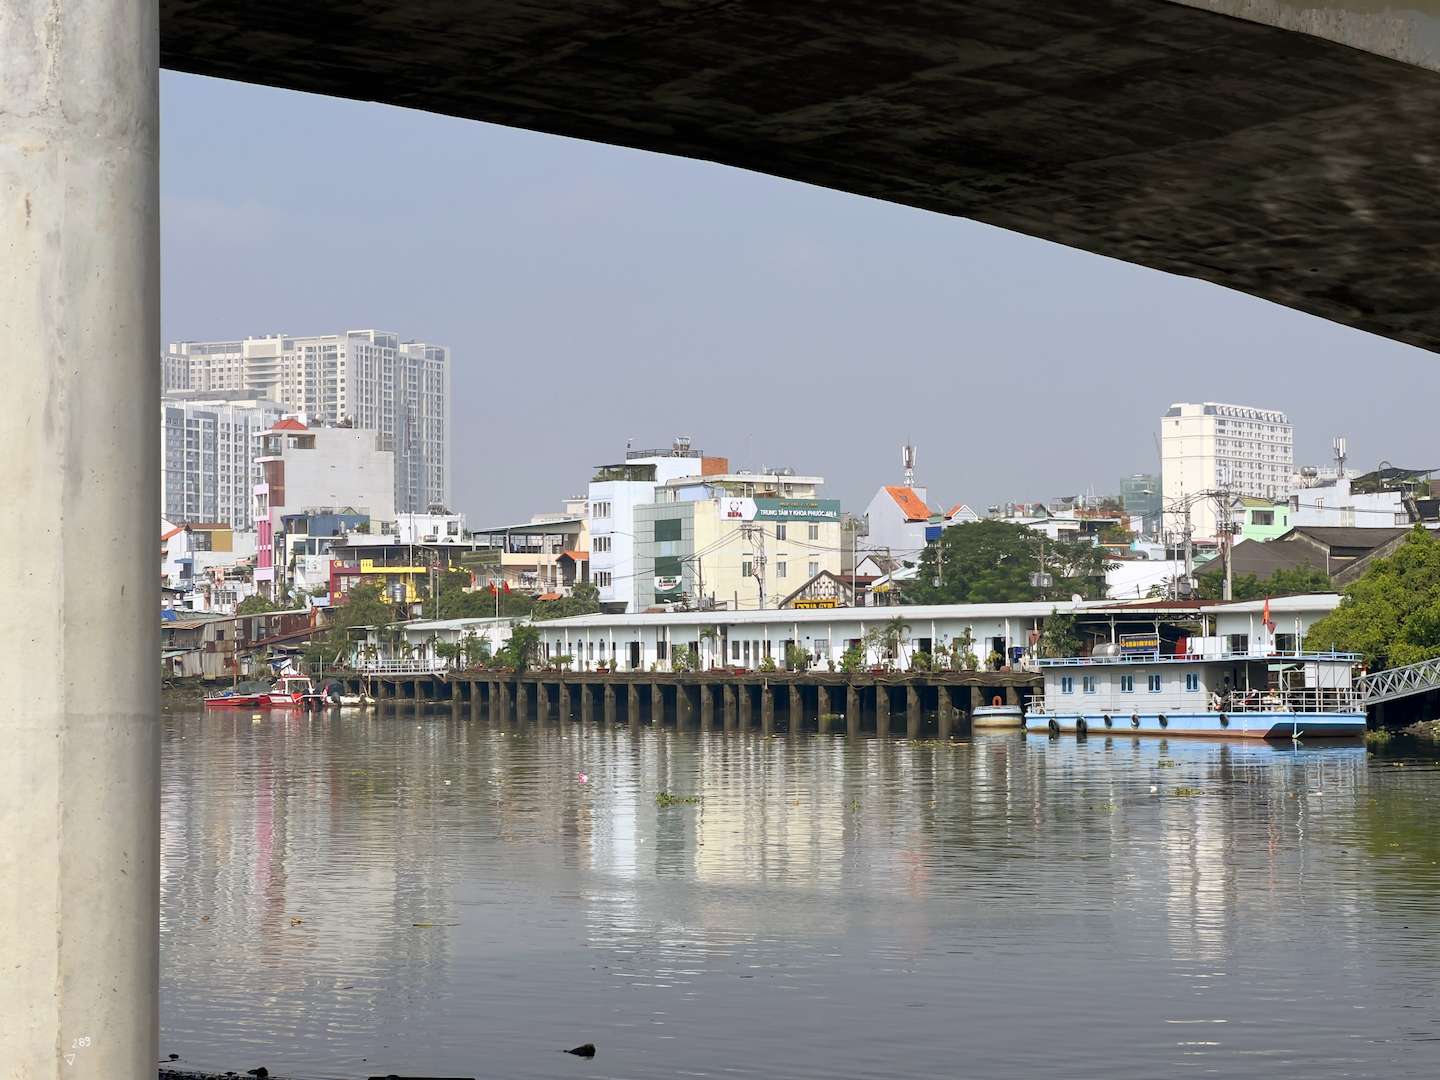 A building complex at the bank of a river in Vietnam